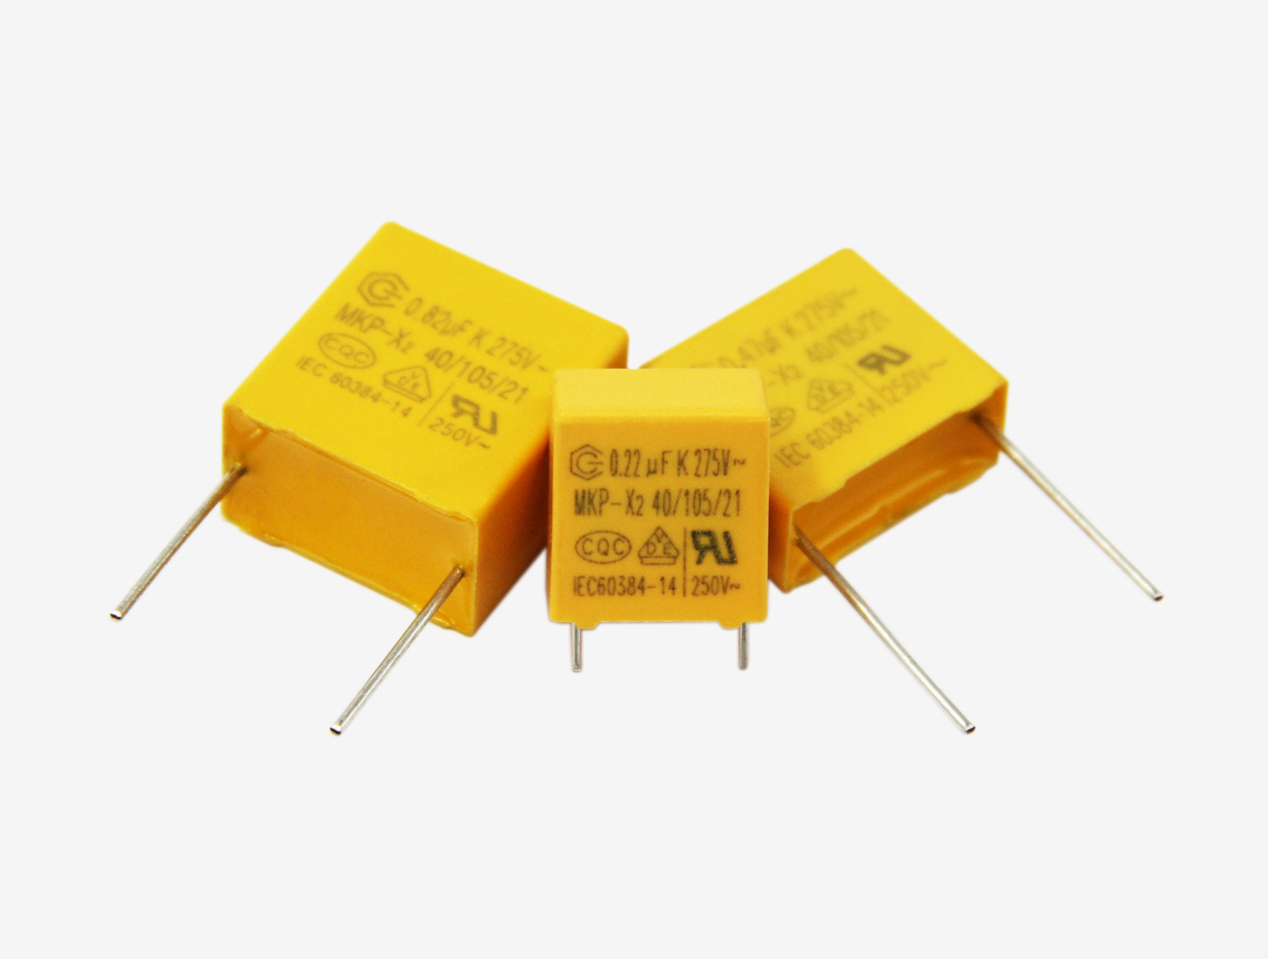 Fixed capacitors for use in electronic equipment